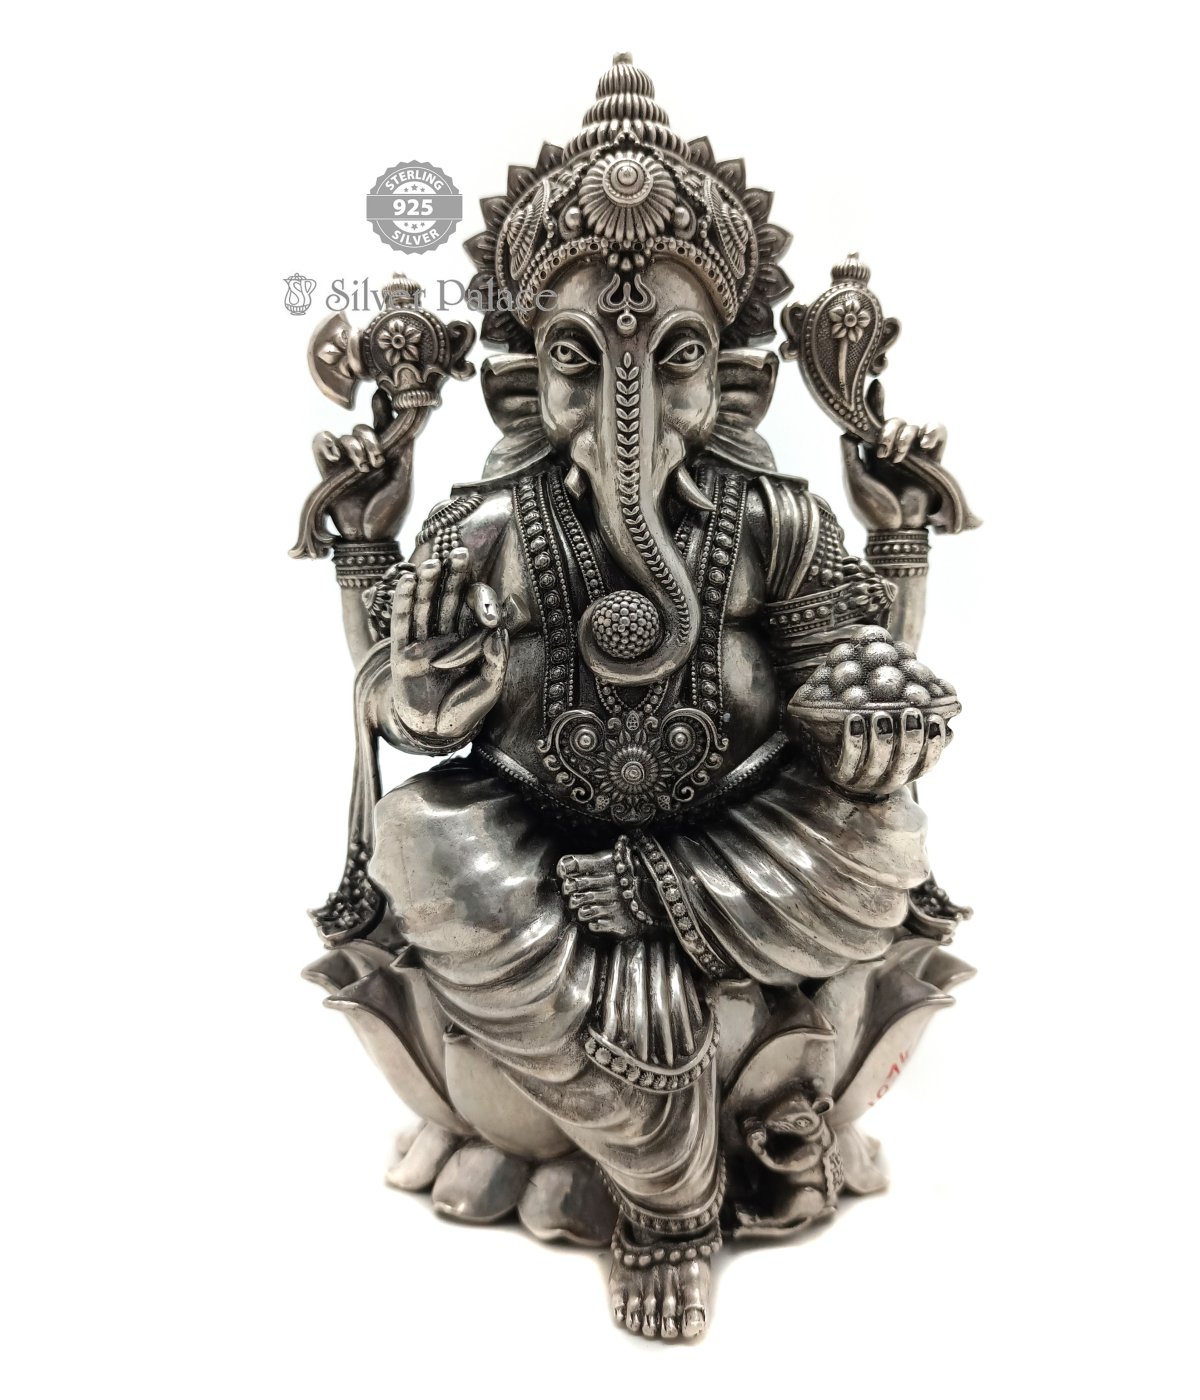 92.5 OXIDISED Silver Lord Ganesh God STATUE  Murti for Home Decor, Pooja Room, Office, Home